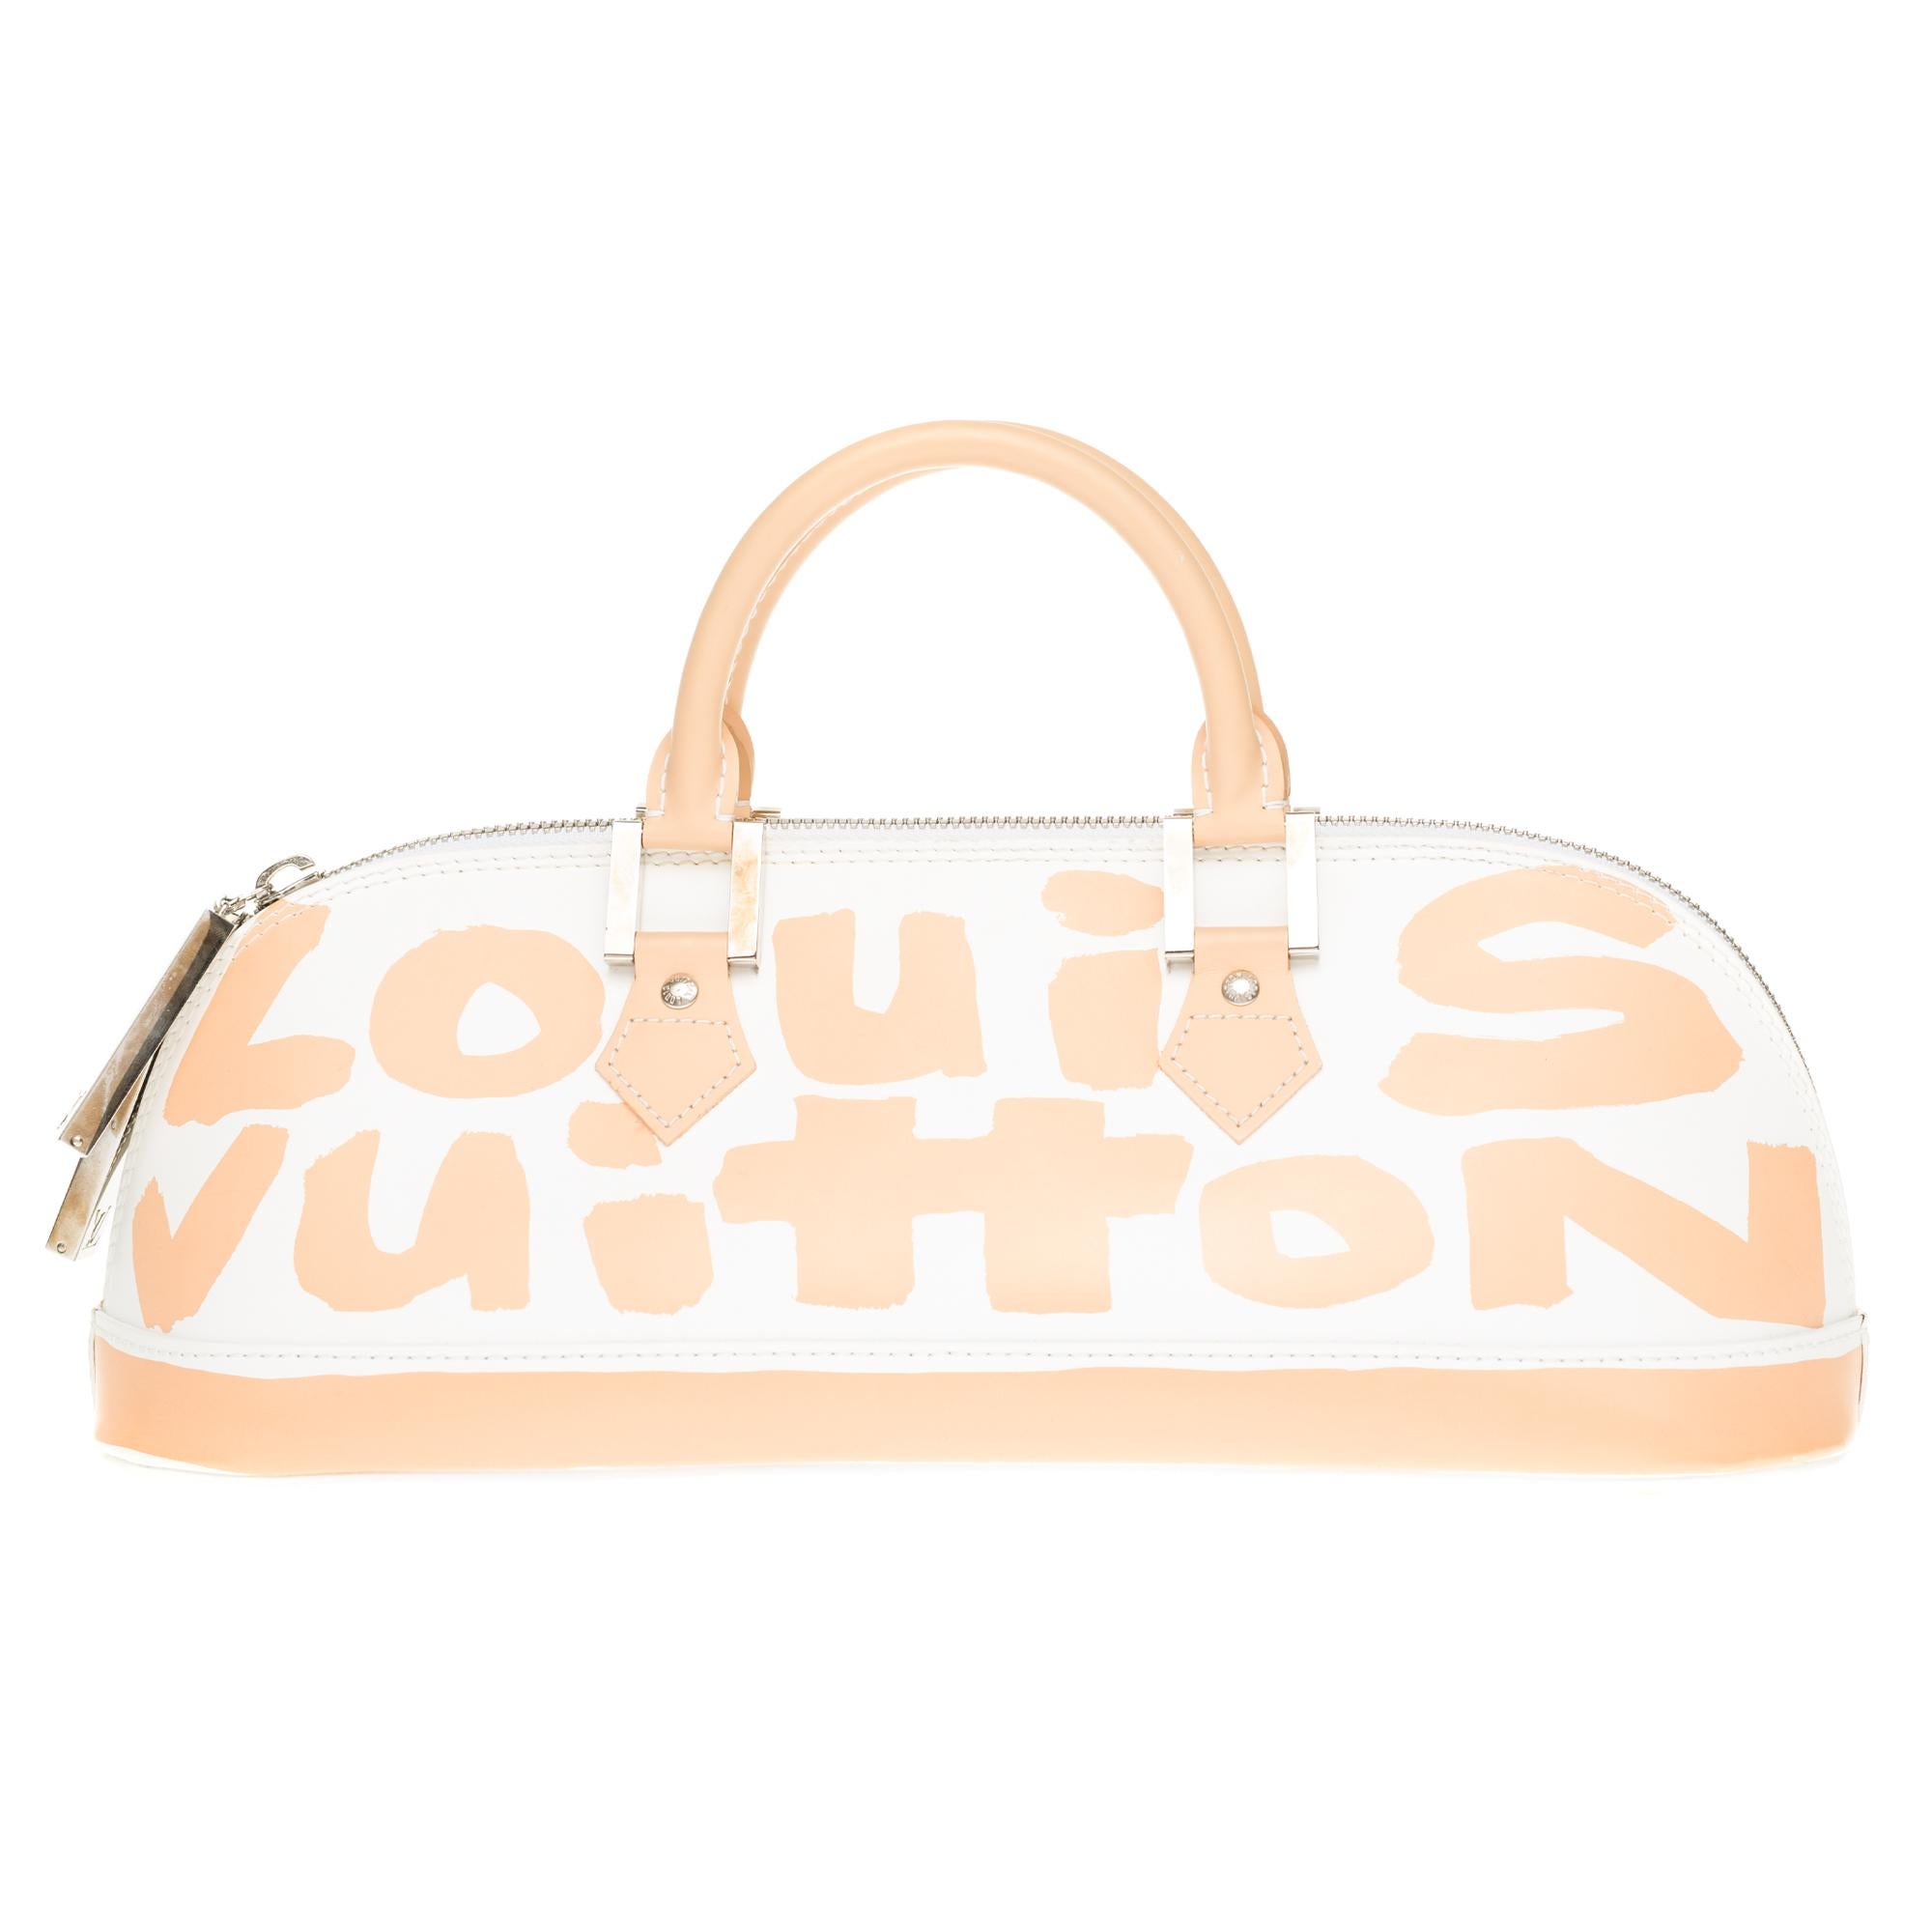 Limited edition: Louis Vuitton Alma GM bag in Graffiti Beige & White leather by Stephen Sprouse, double handle in beige leather.
Double slider zipper with brand-marked charms.
Beige microfiber inside, 1 patch pocket.
4 feet of LV bag.
Signature: